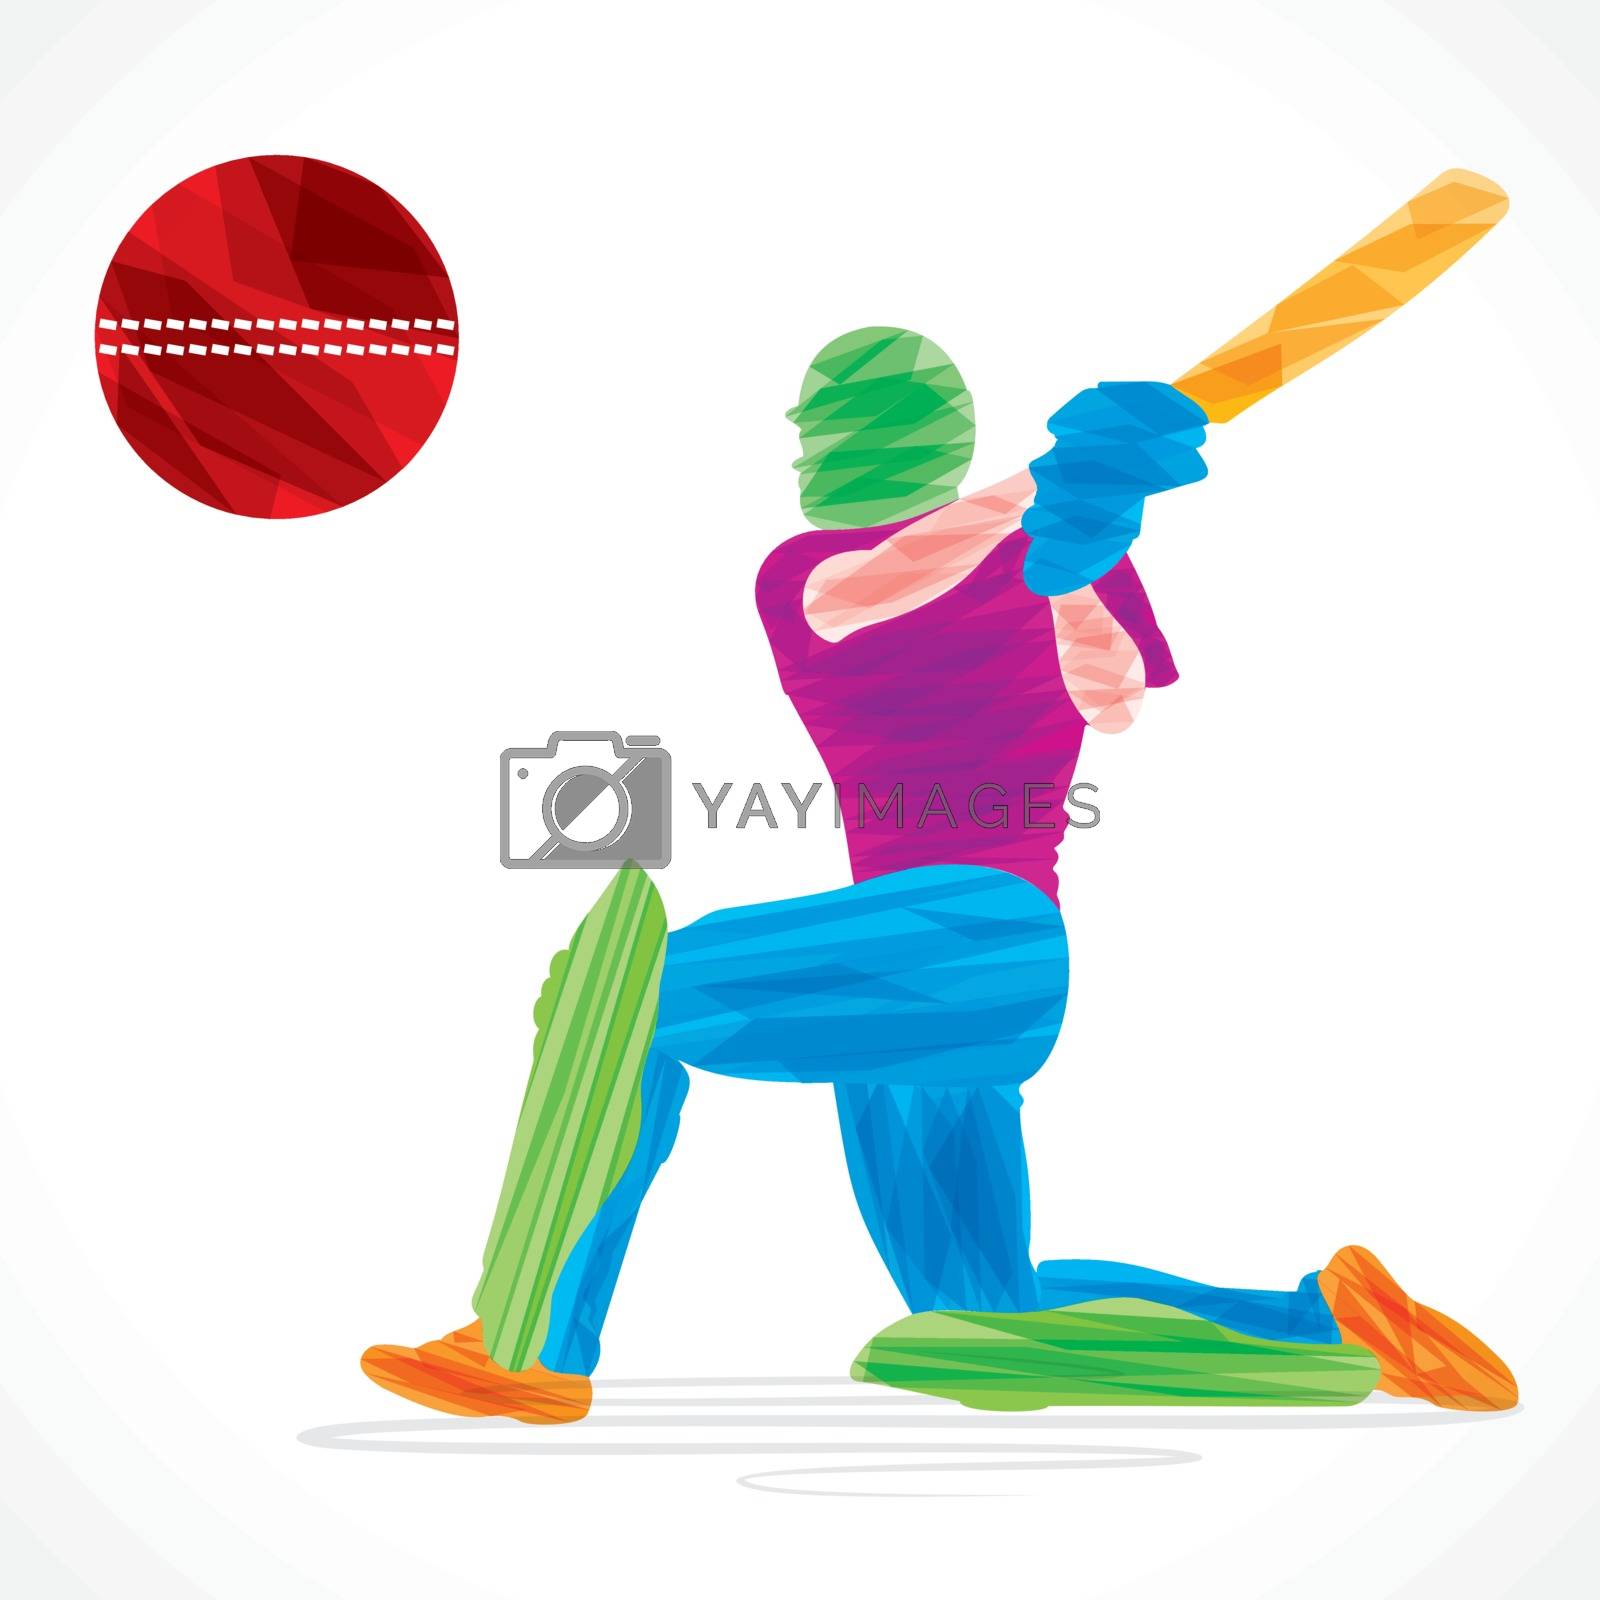 Royalty free image of creative abstract cricket player design by brush stroke vector by vectoraart